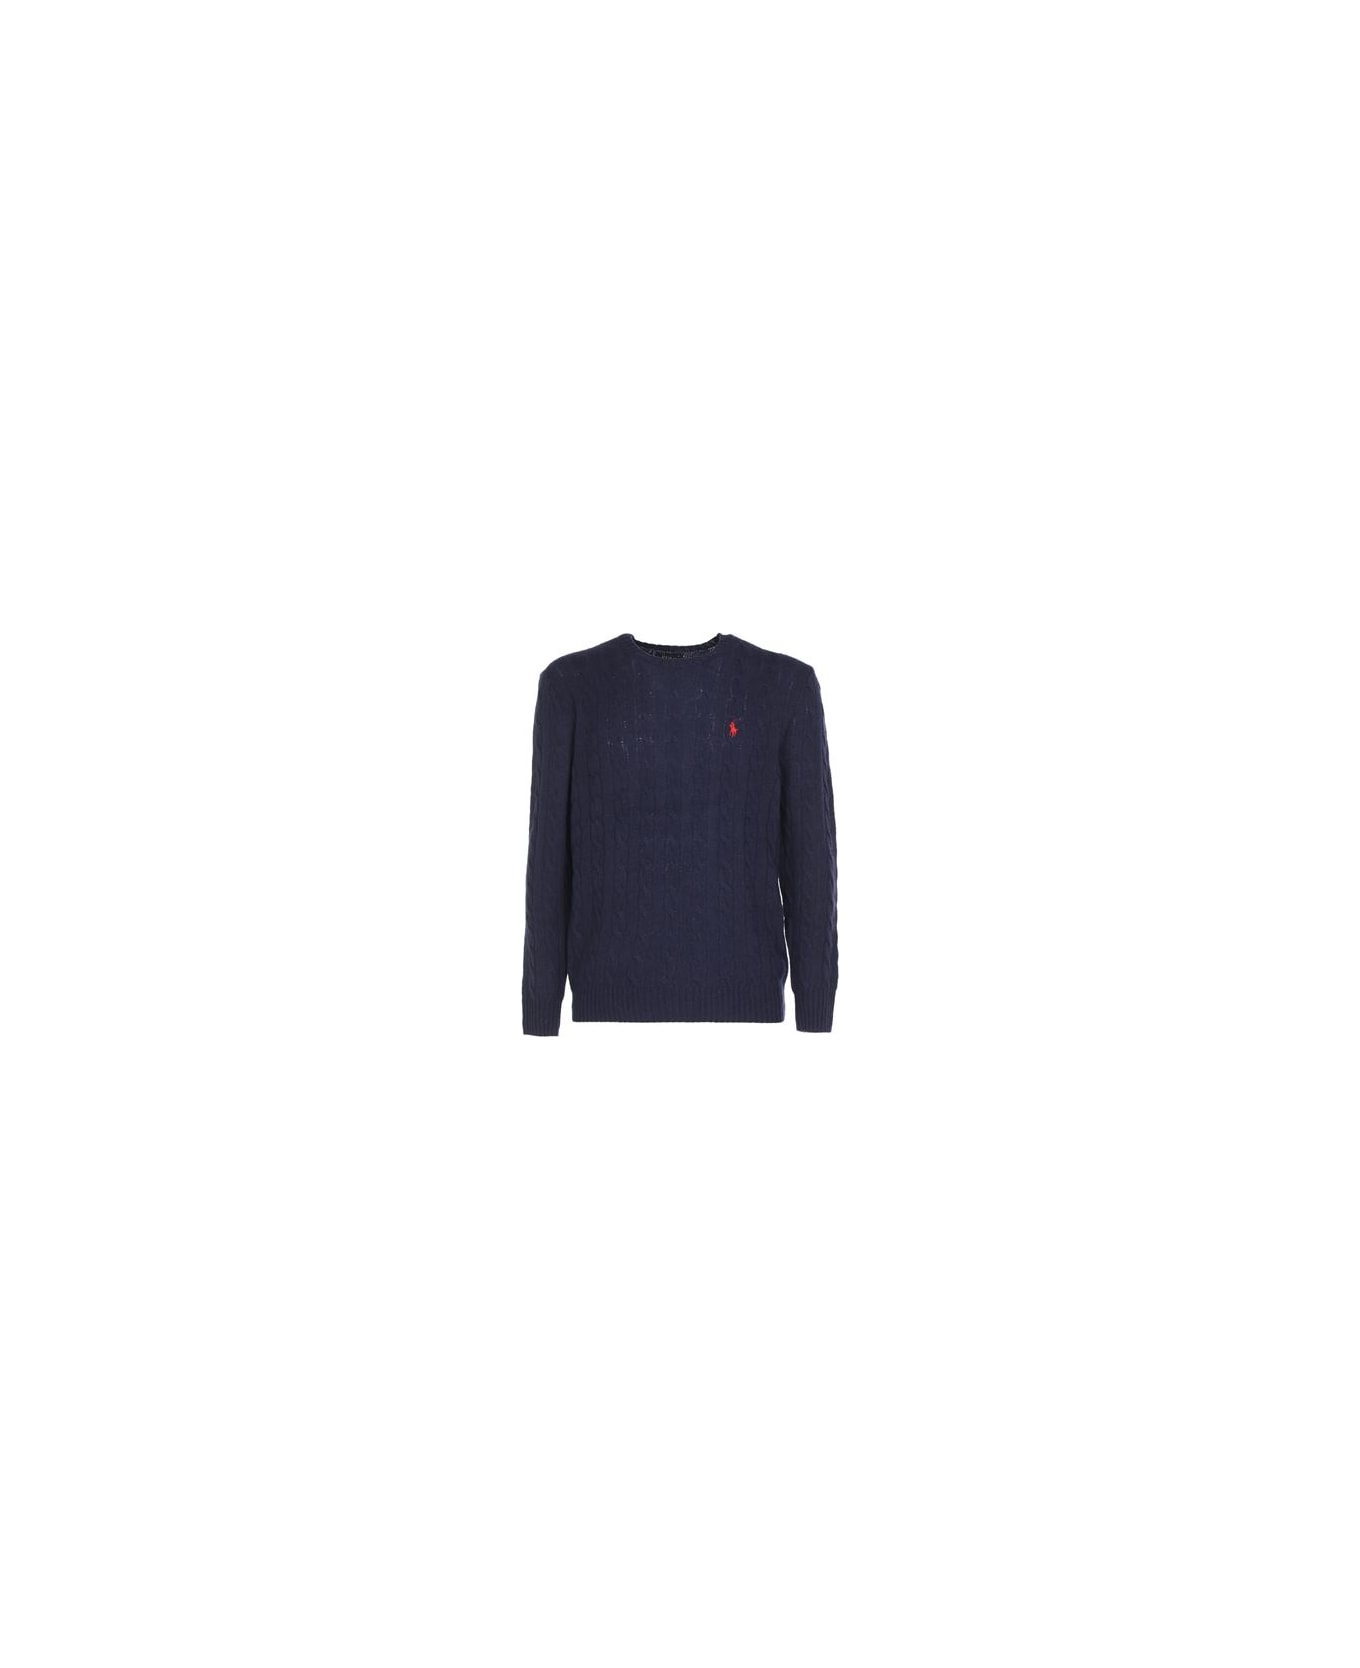 Polo Ralph Lauren Cable Knit Sweater ニットウェア